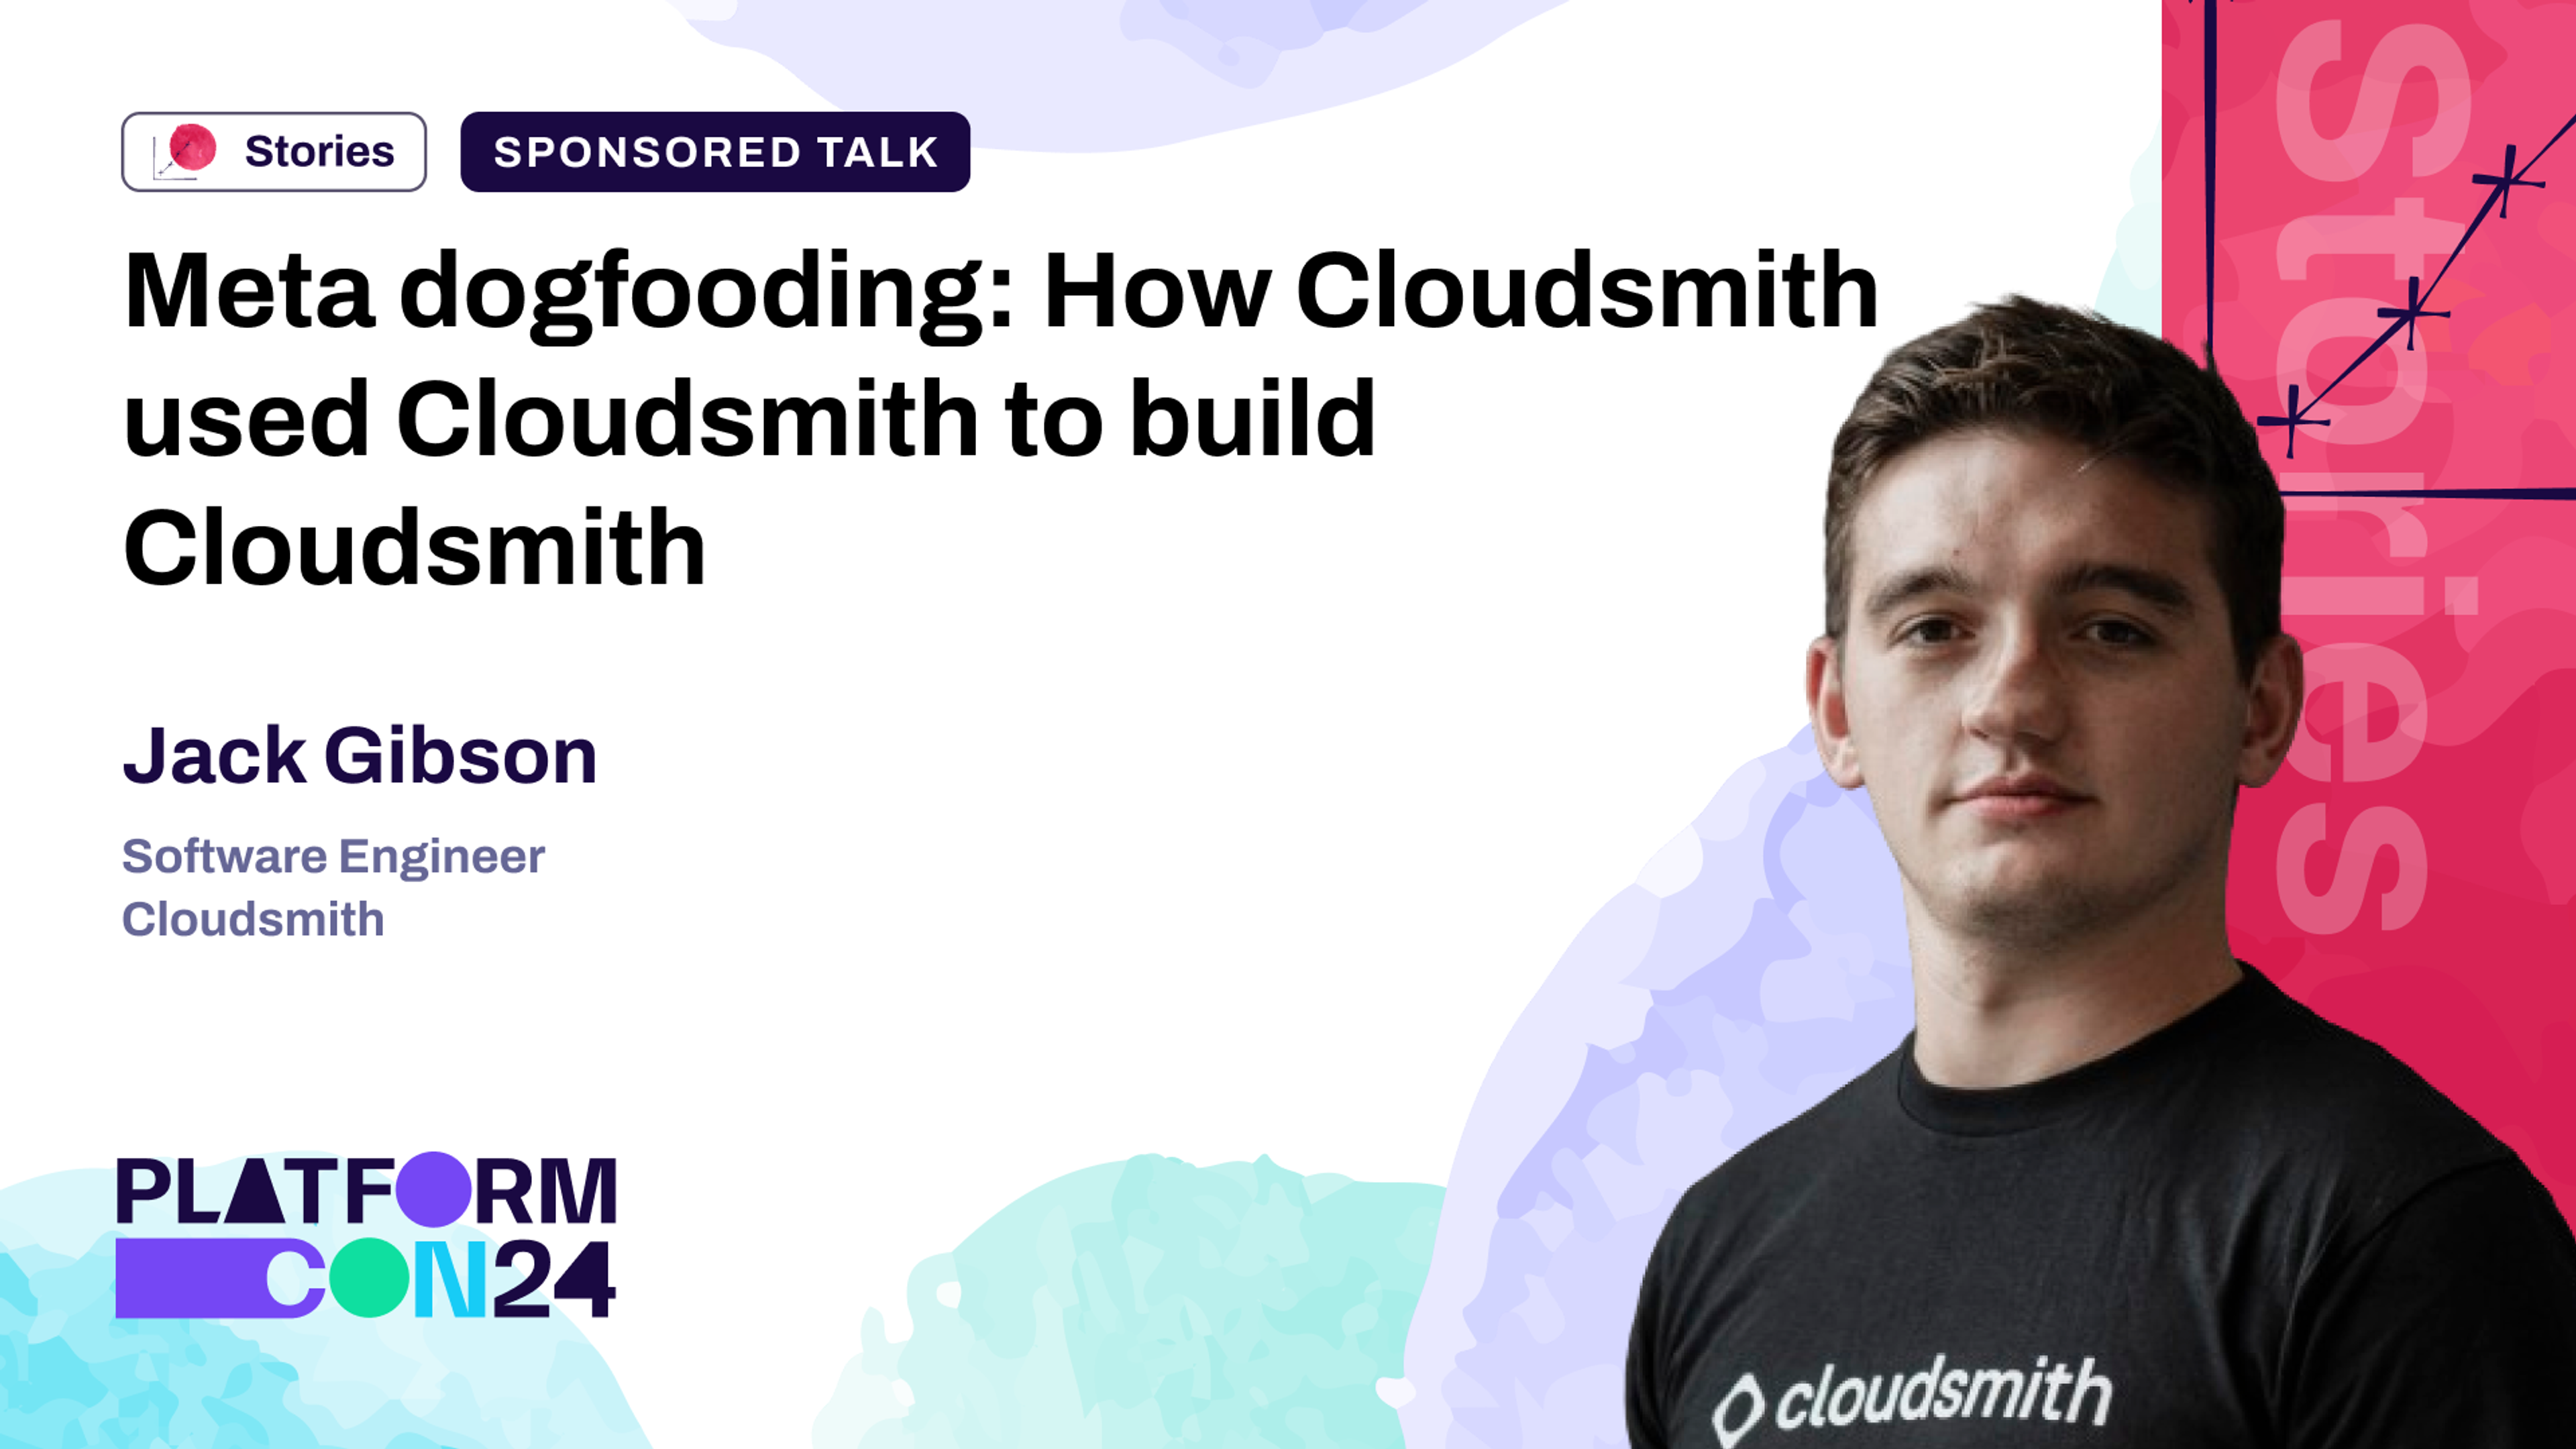 Meta dogfooding: How Cloudsmith used Cloudsmith to build Cloudsmith